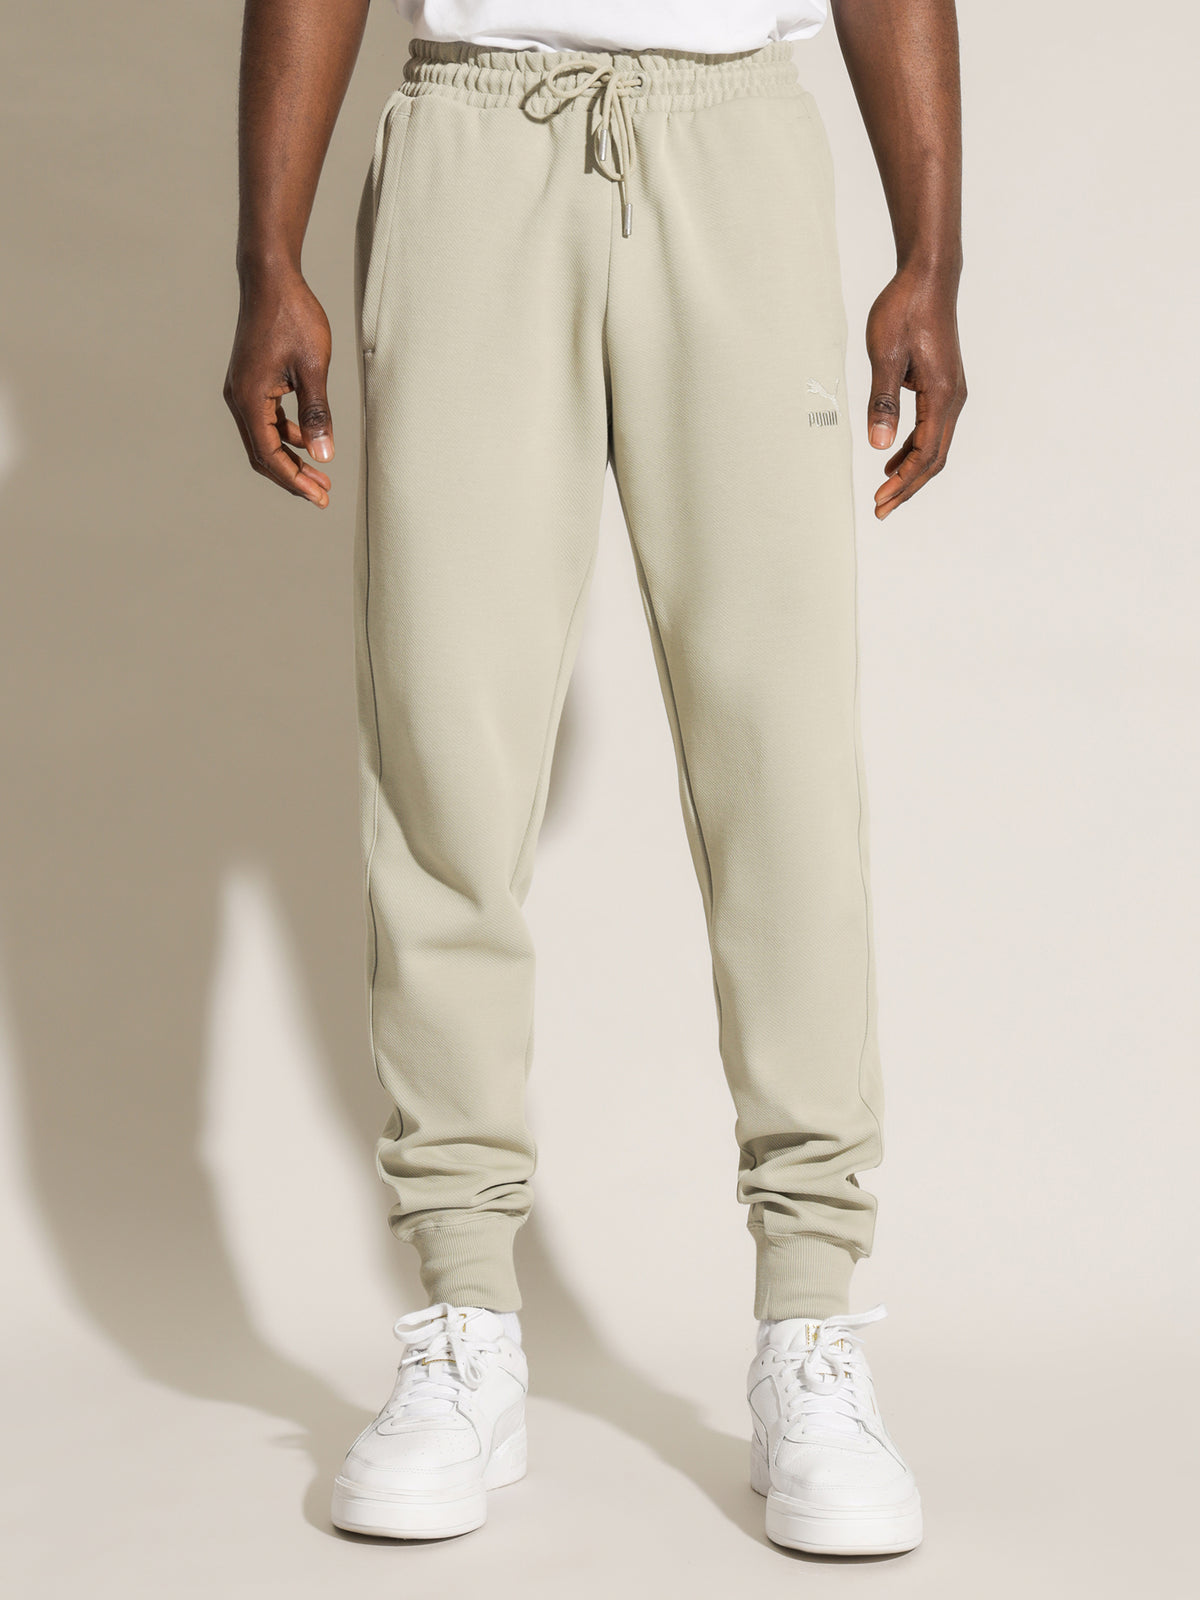 T7 Track Pants in Pebble Grey